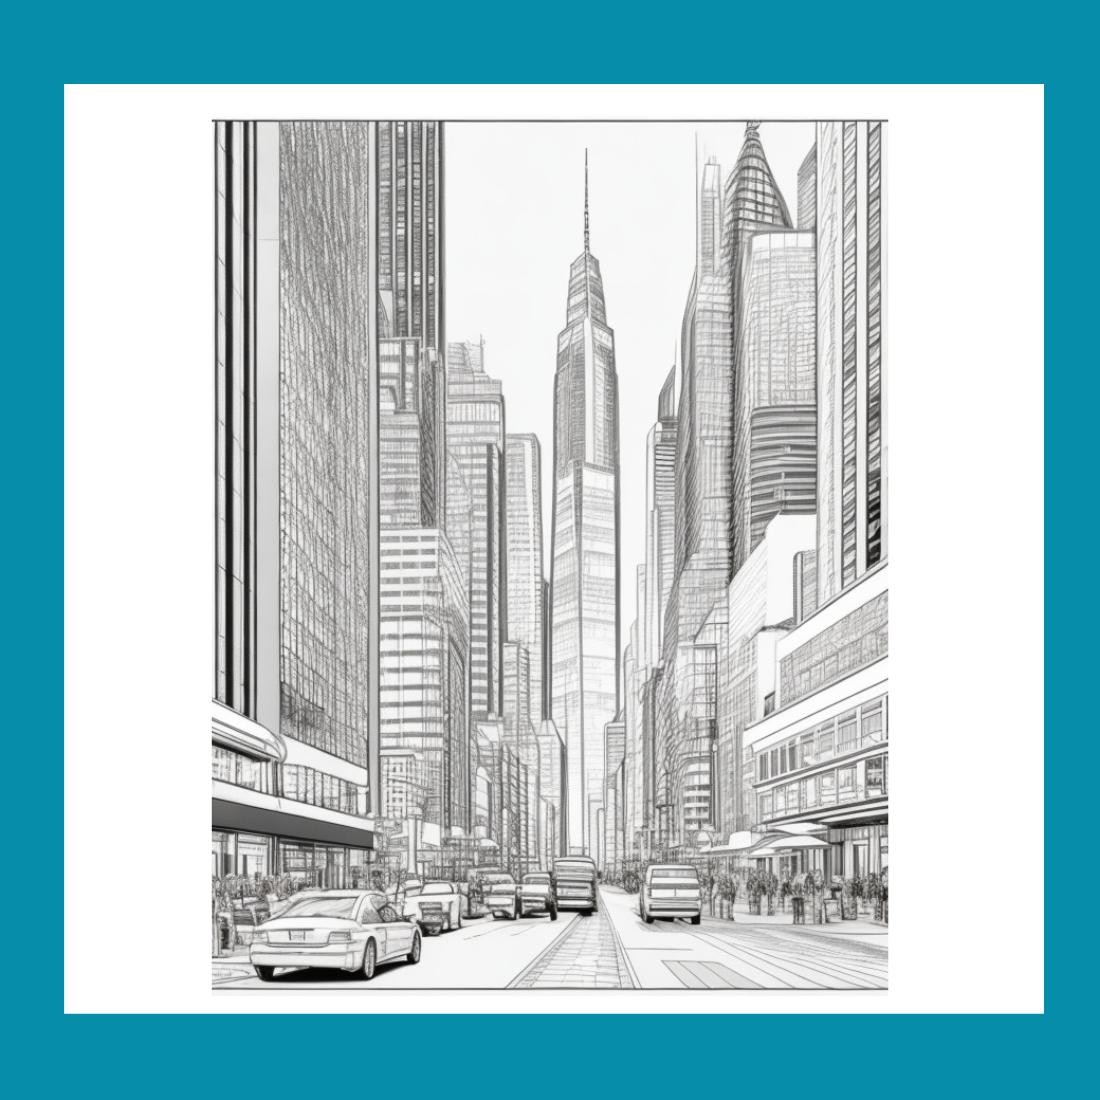 A cityscape with skyscrapers and a busy street scene coloring 3 preview image.